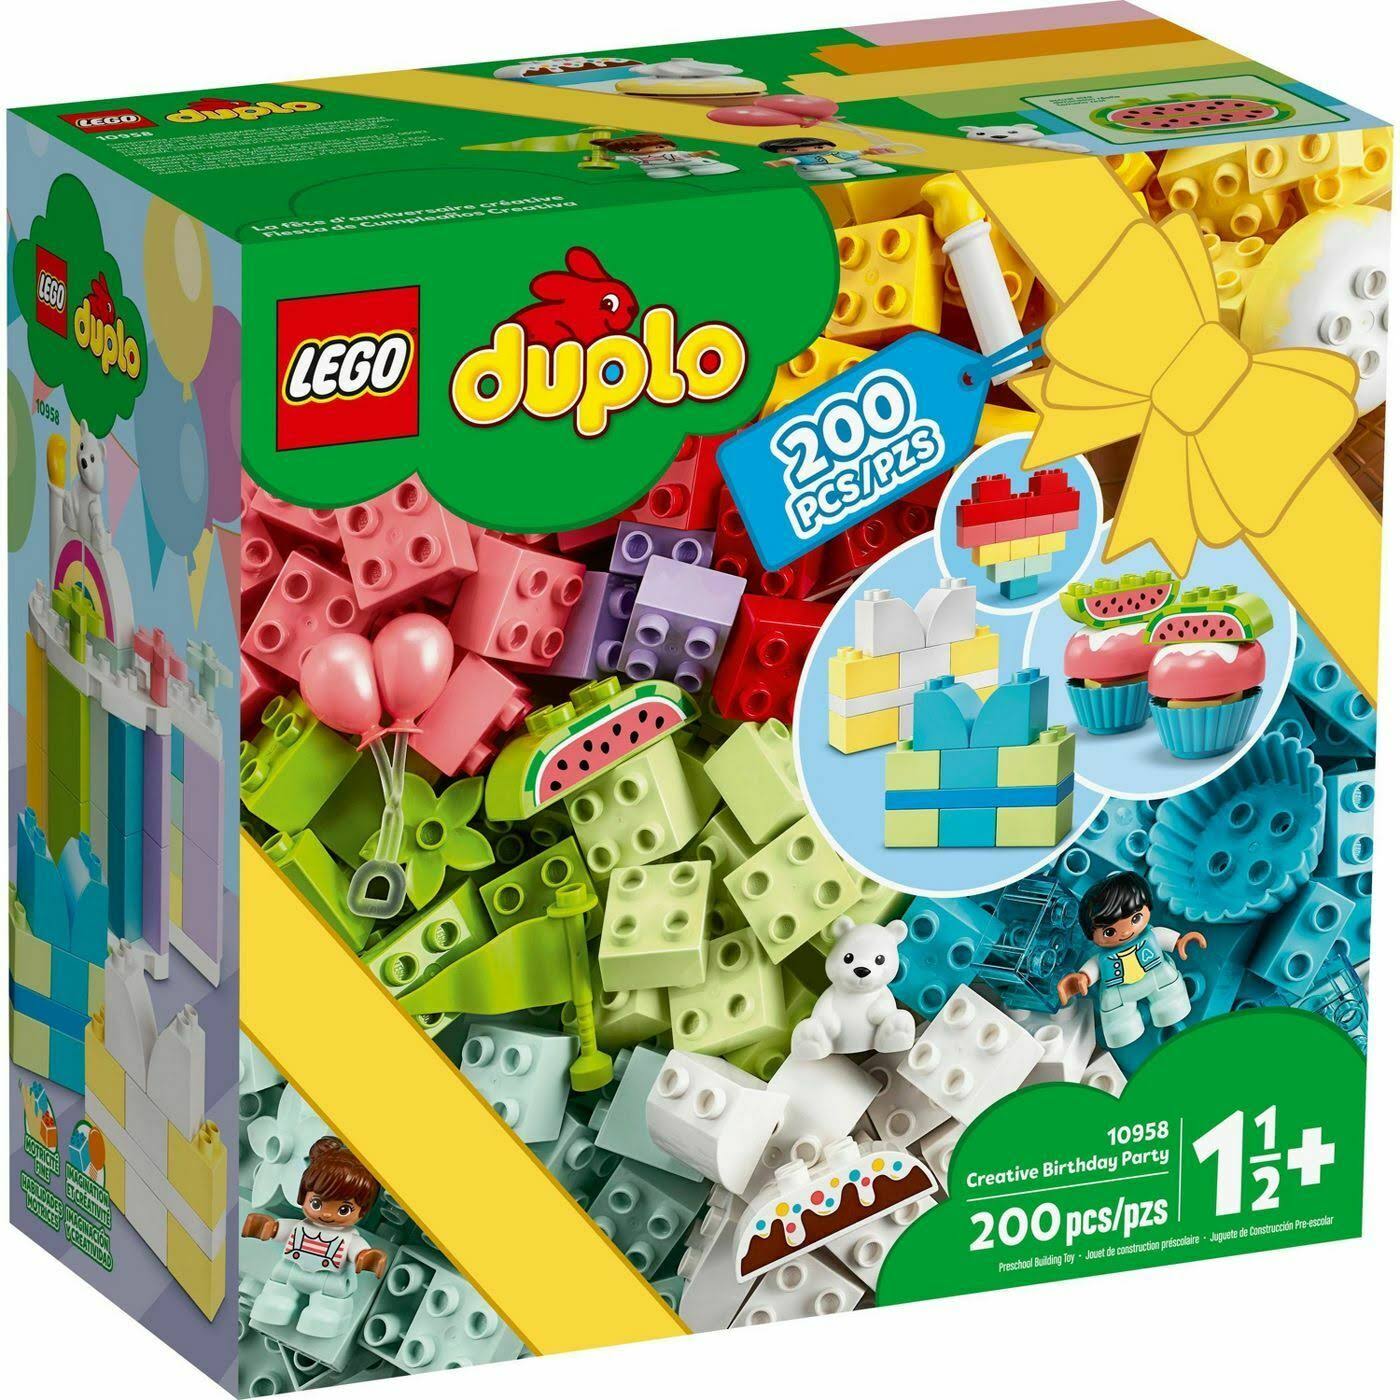 Lego 10958 DUPLO Classic Creative Birthday Party New with Sealed Box